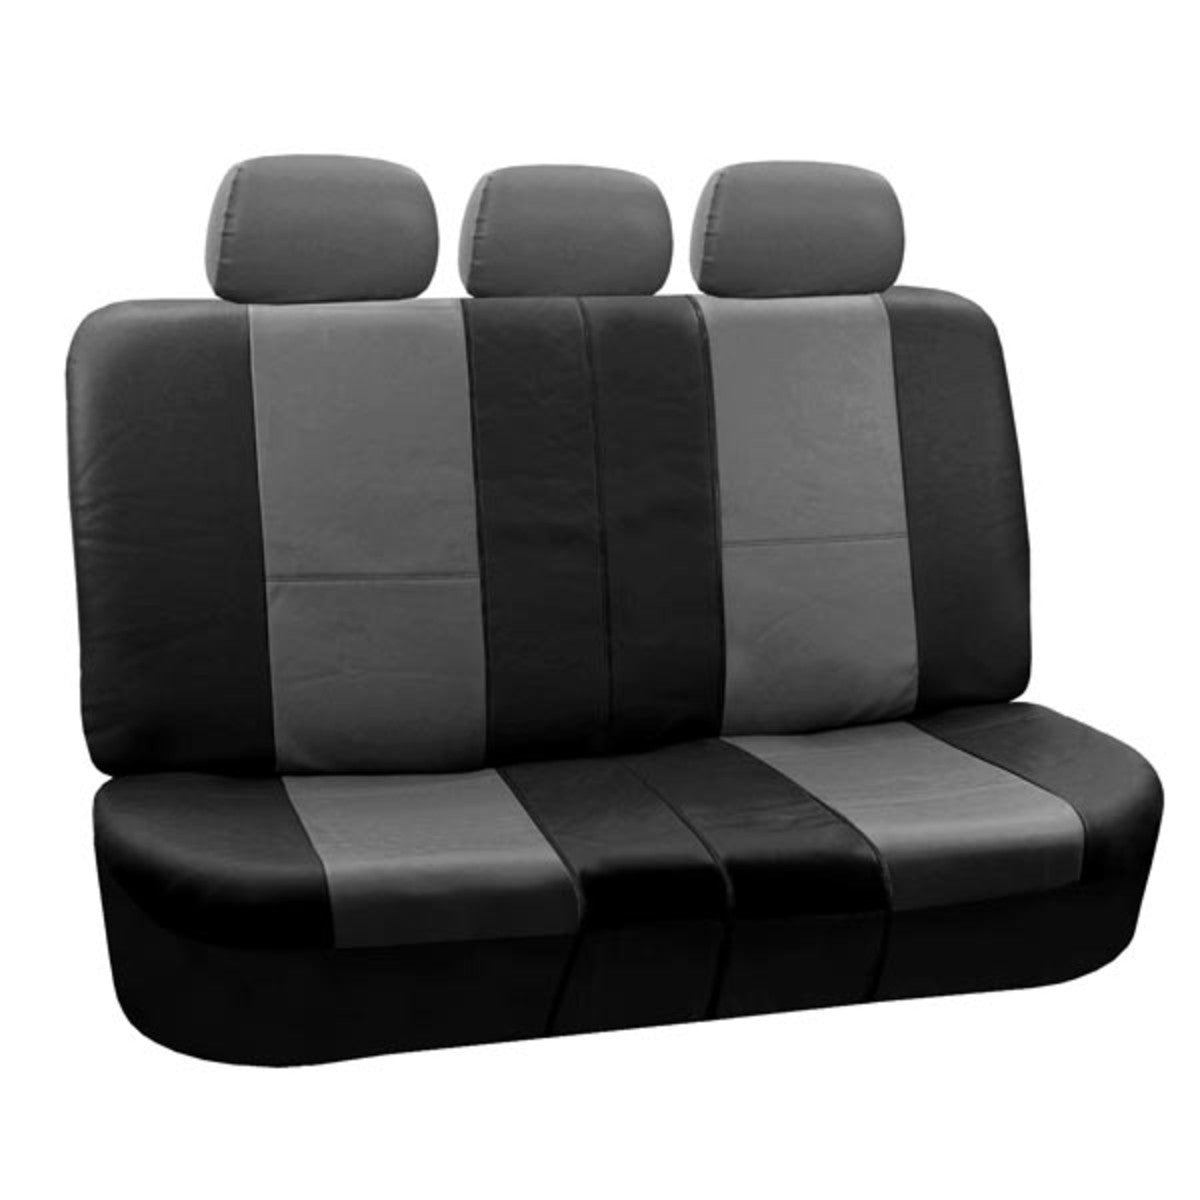 Premium PU Leather Seat Covers - Rear Gray / Black